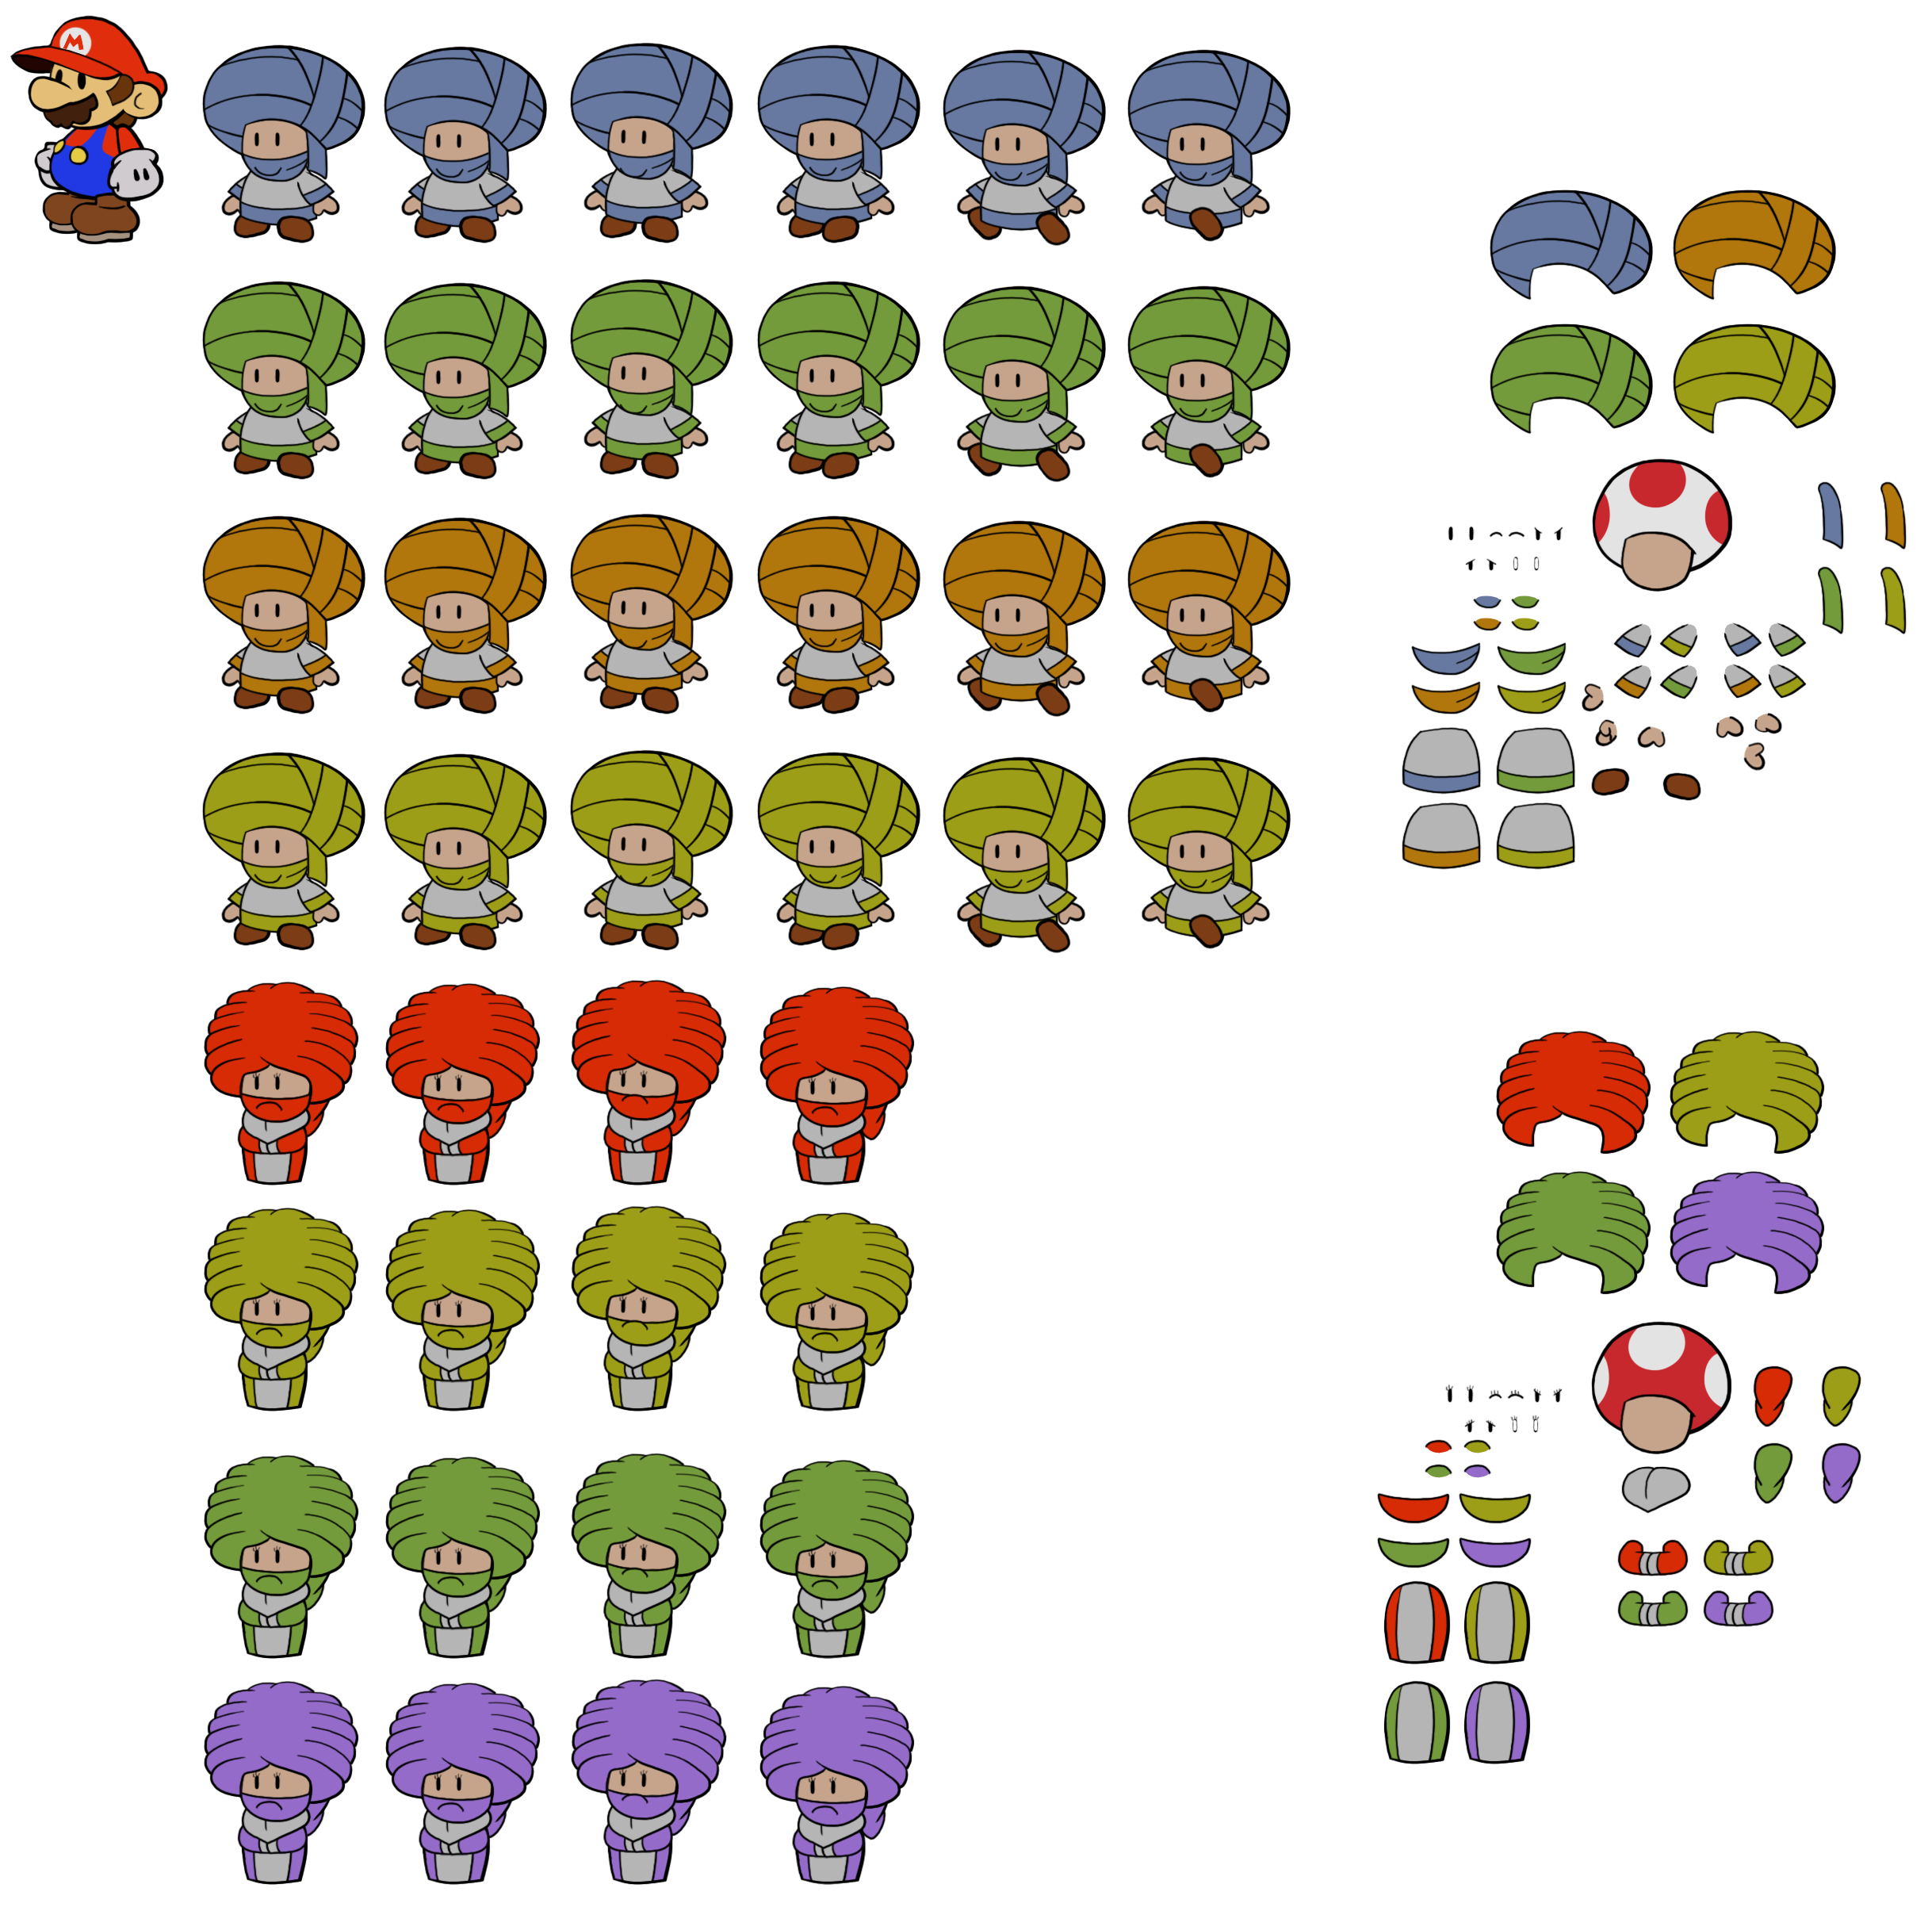 Paper Mario Customs - Dry Dry Toads (Paper Mario-Style)